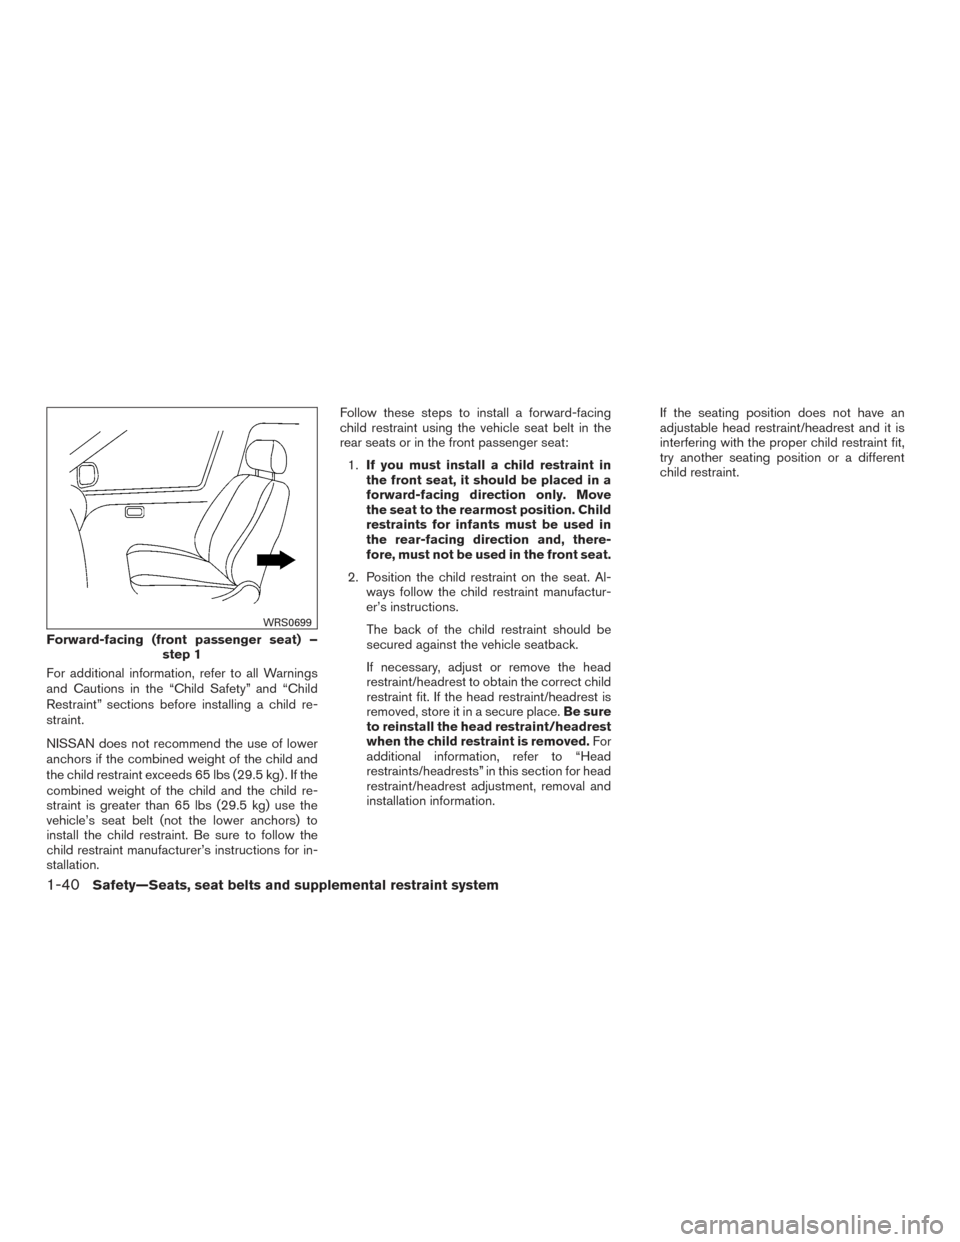 NISSAN XTERRA 2015 N50 / 2.G User Guide For additional information, refer to all Warnings
and Cautions in the “Child Safety” and “Child
Restraint” sections before installing a child re-
straint.
NISSAN does not recommend the use of 